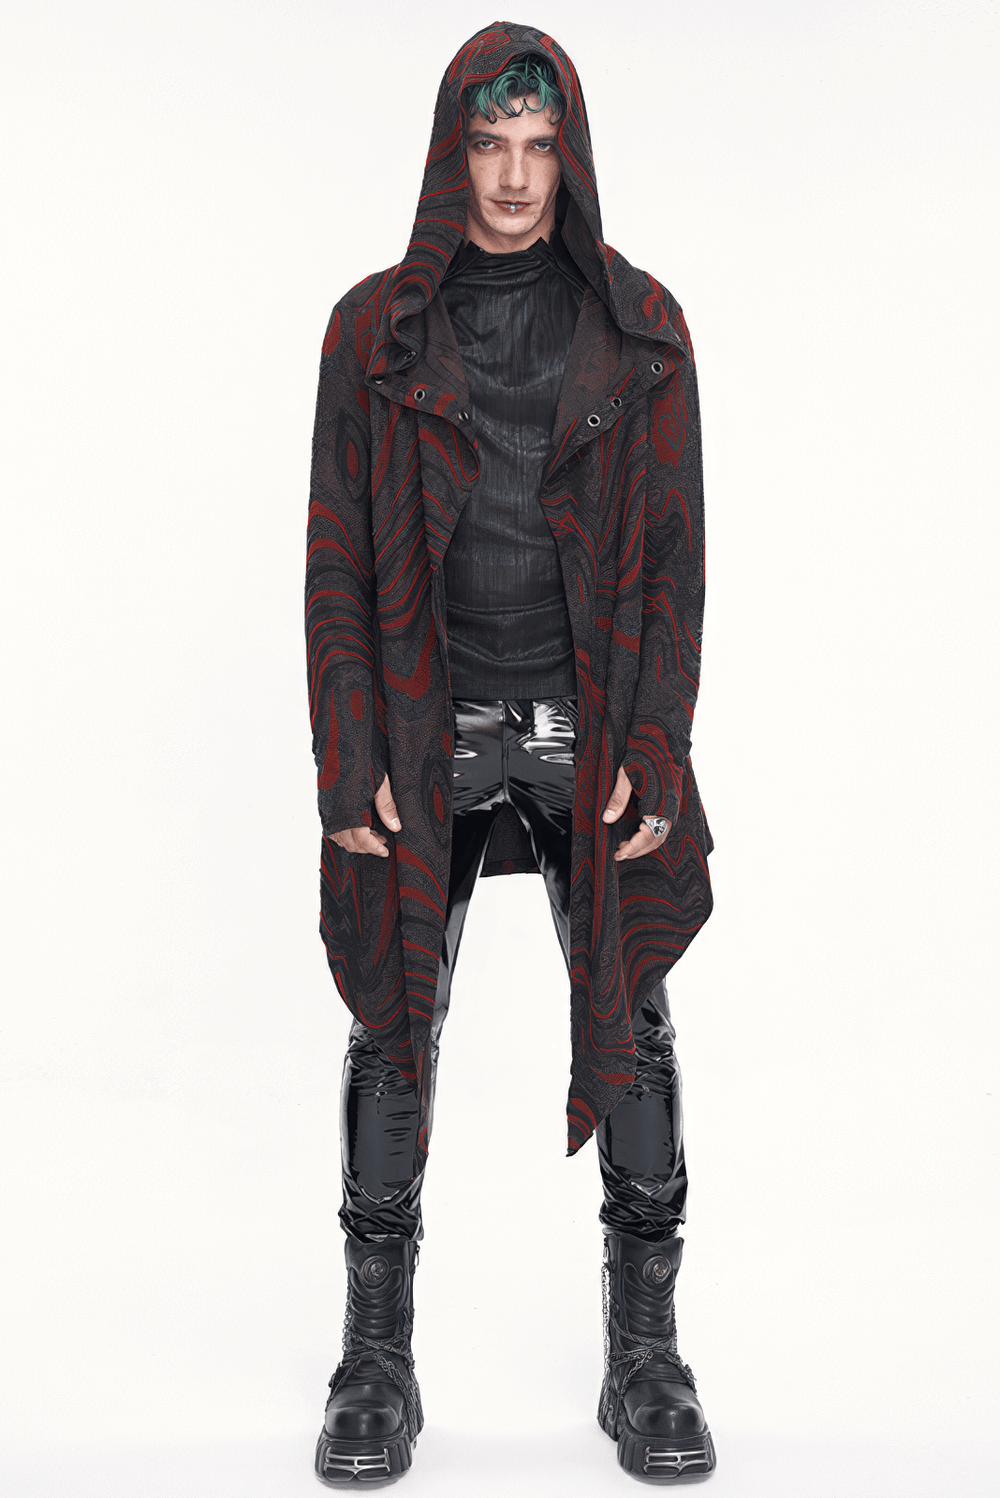 Men's Goth Irregular Hooded Coat with Rows of Chain at the Back